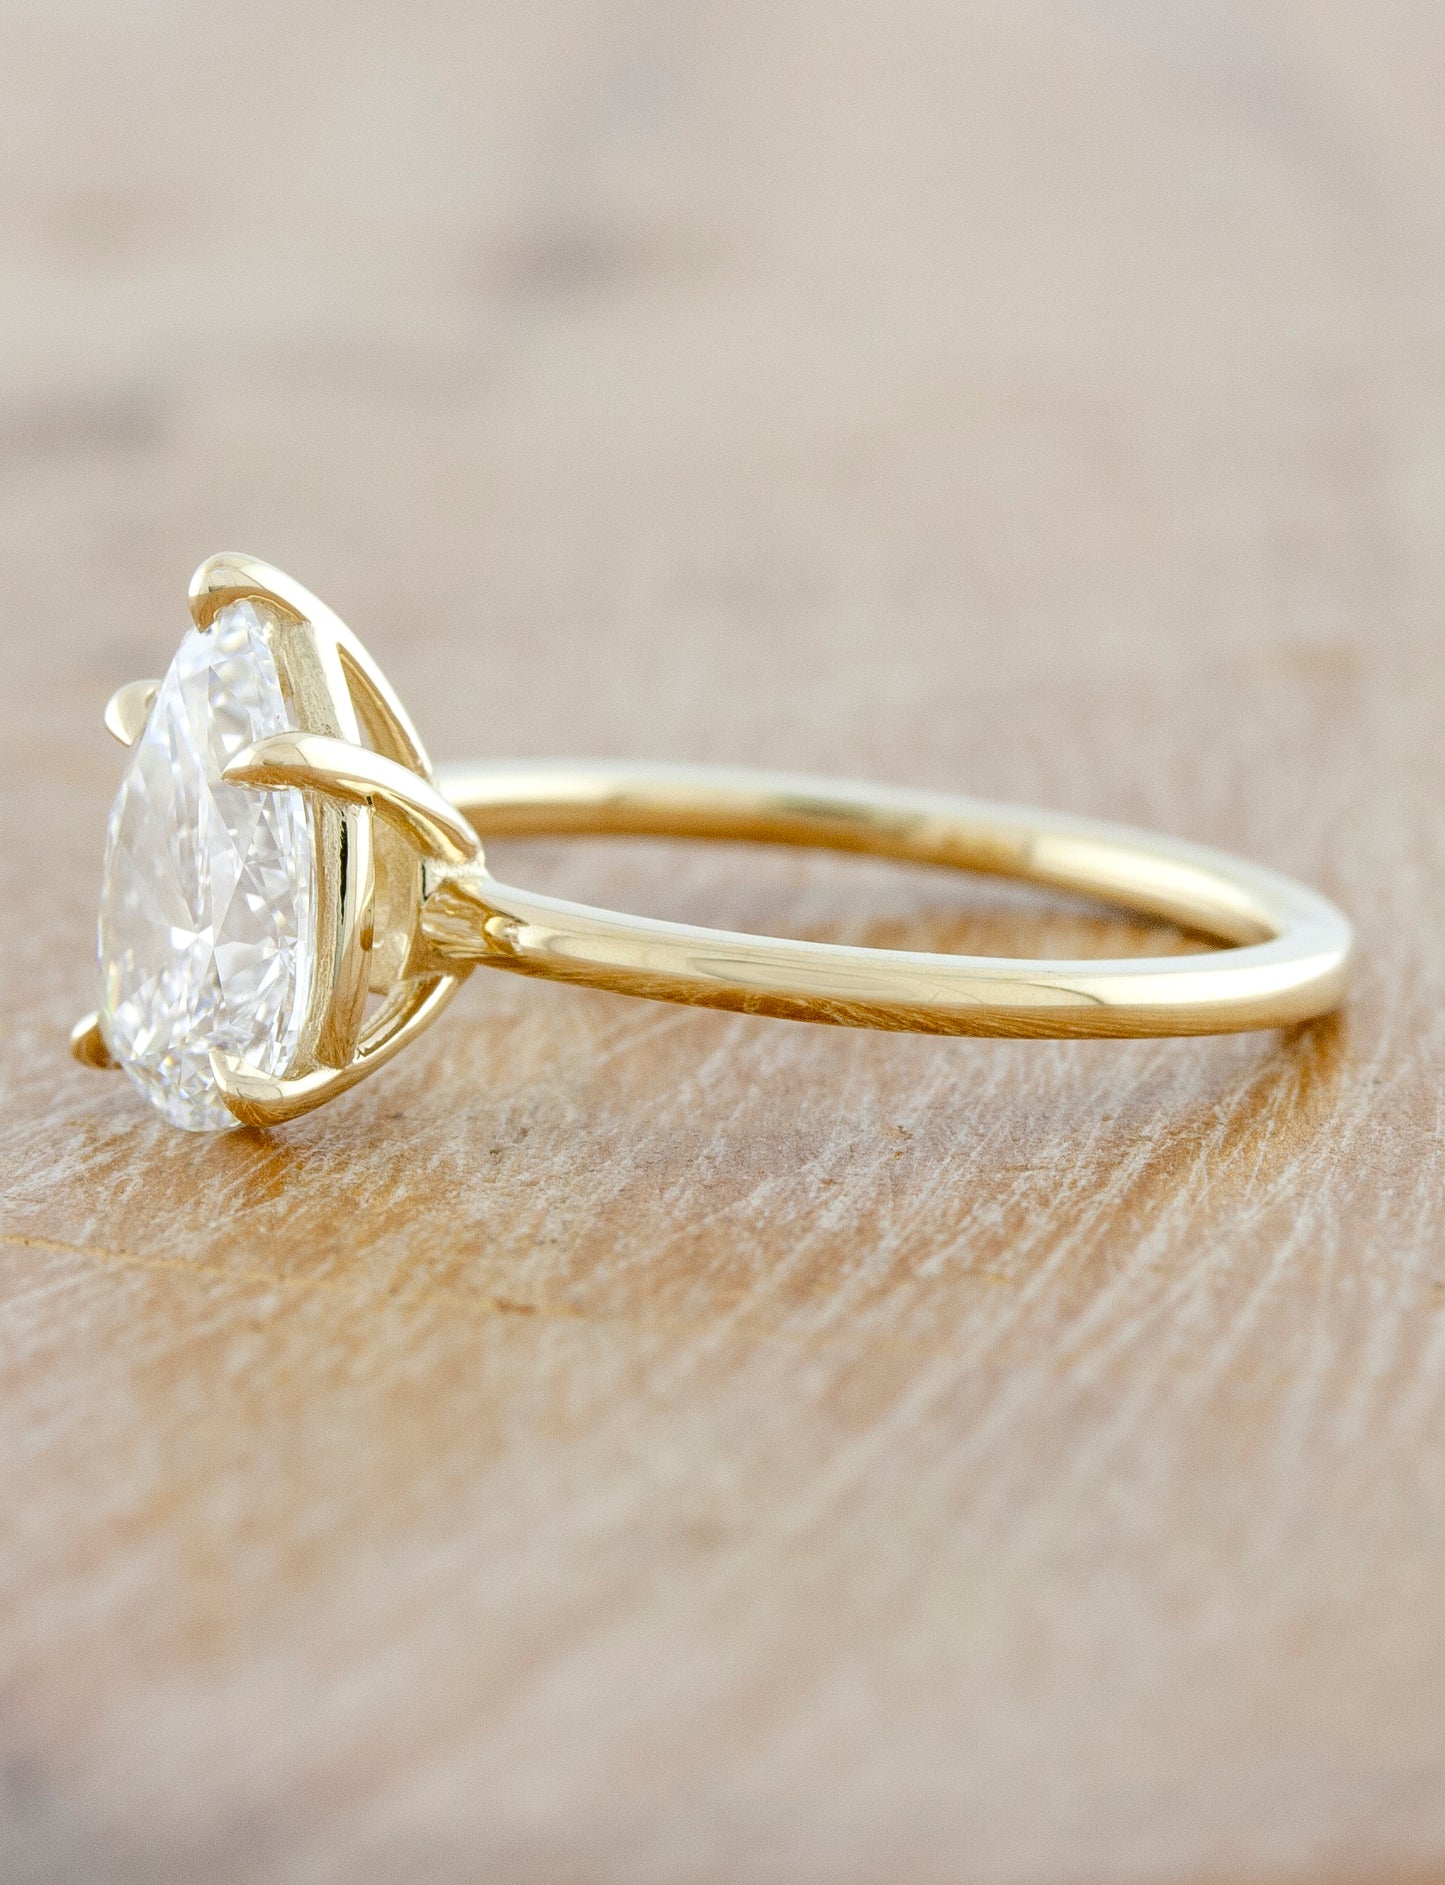 caption:Shown in 14k yellow gold